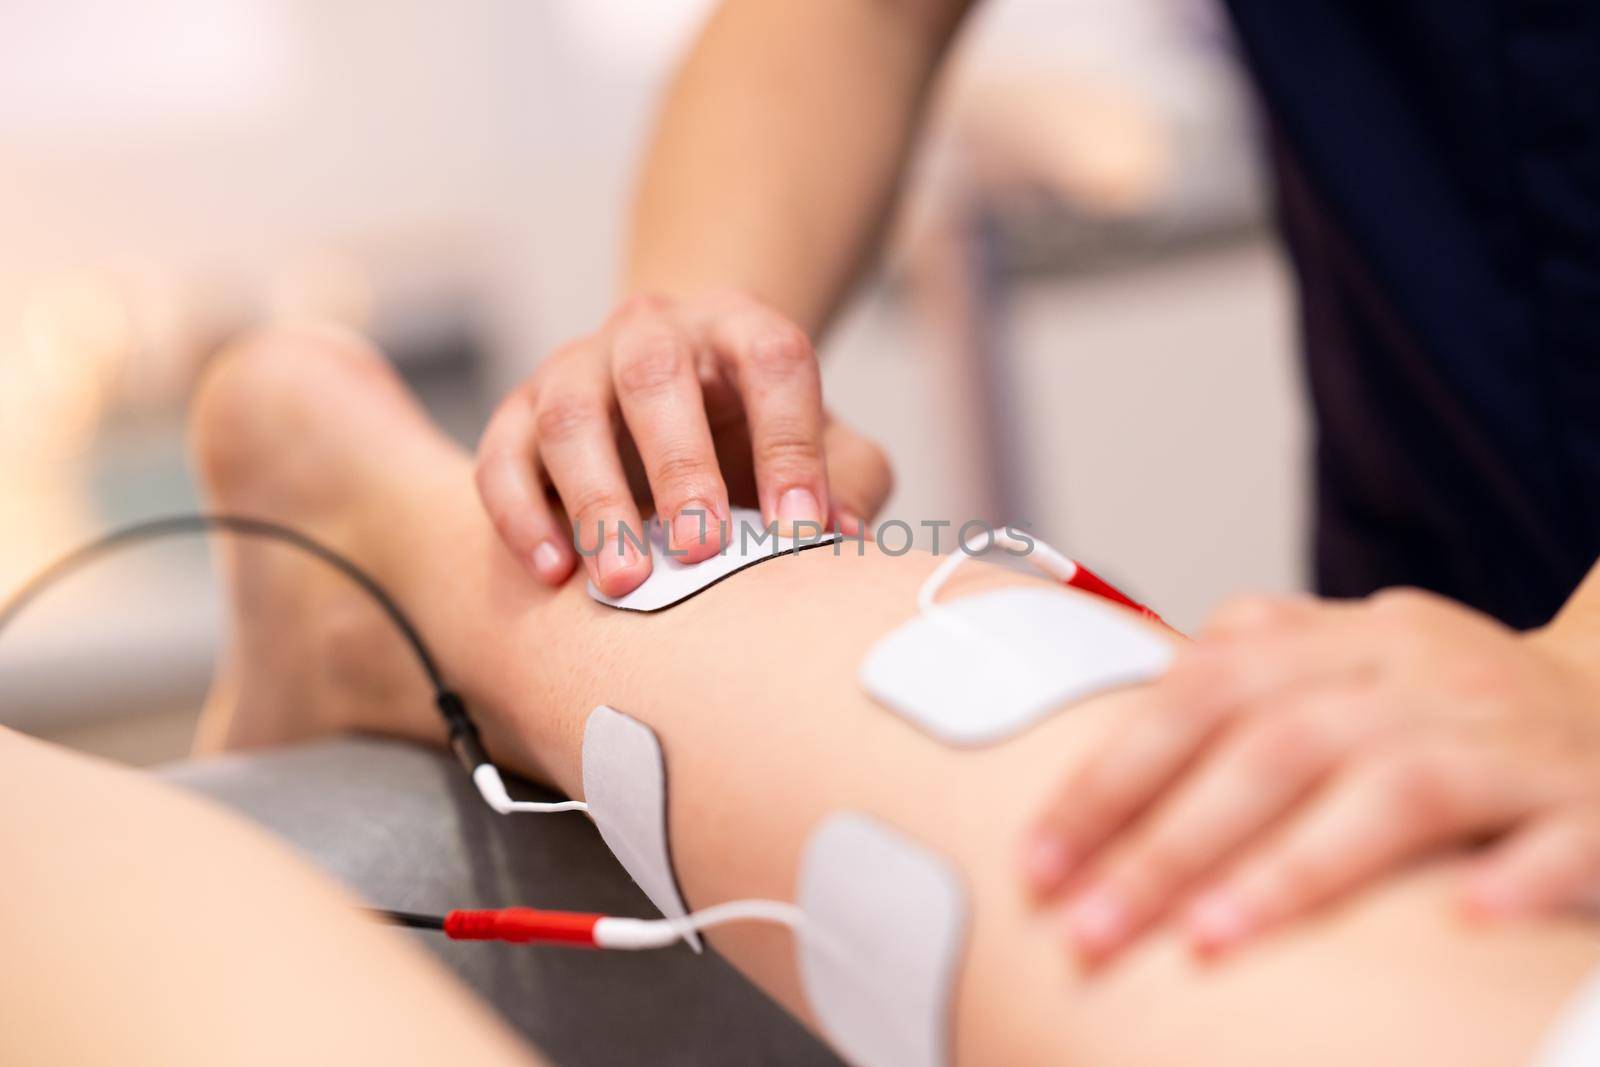 Physiotherapist applying electro stimulation in physical therapy to a young woman.